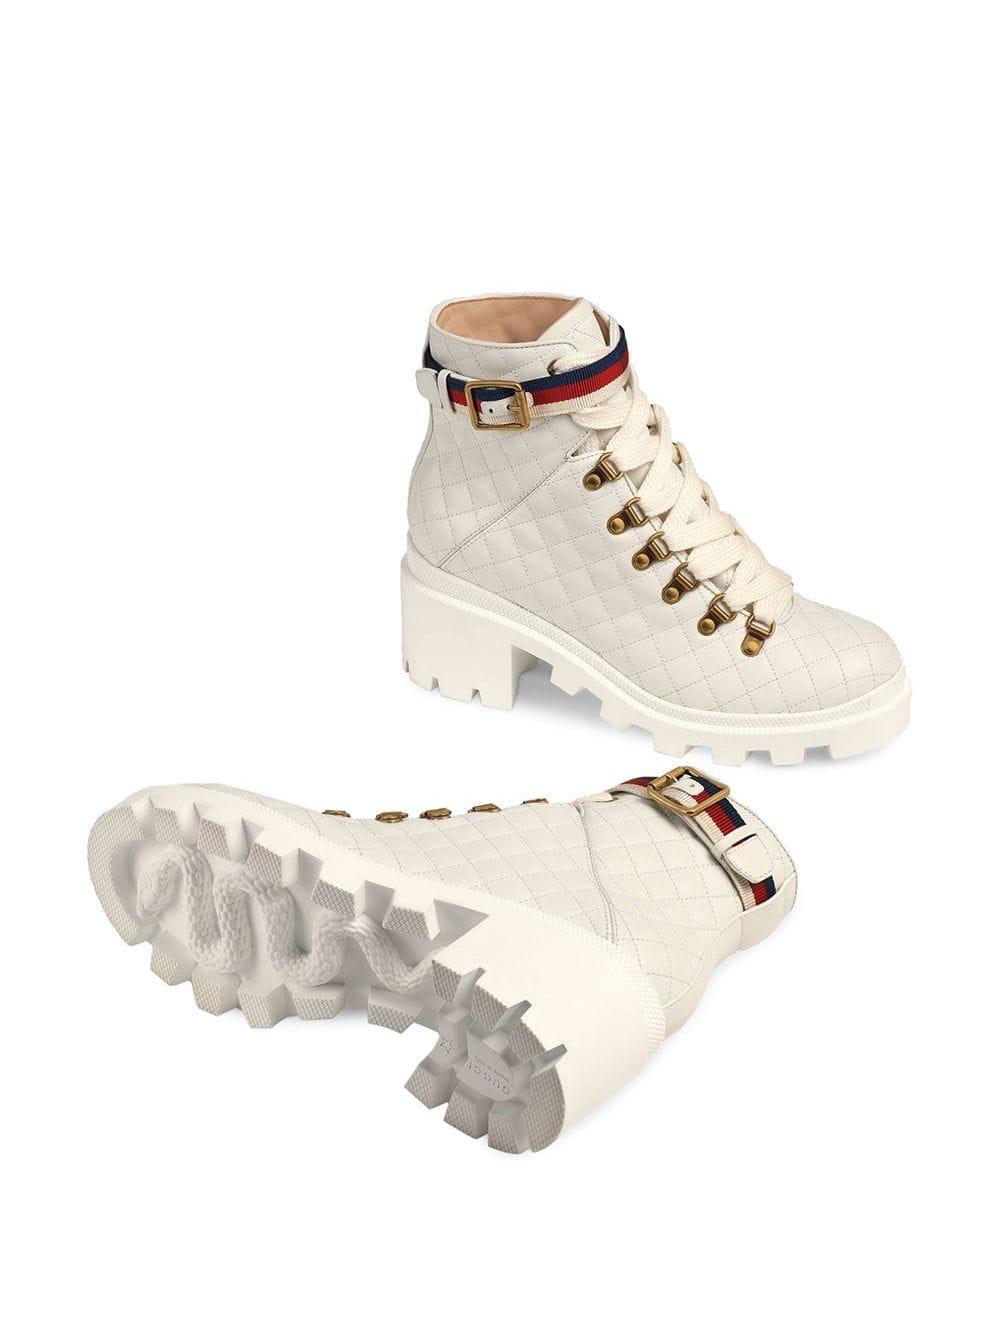 Lave Grøn Repræsentere Gucci Quilted Leather Ankle Boot With Belt in White - Lyst